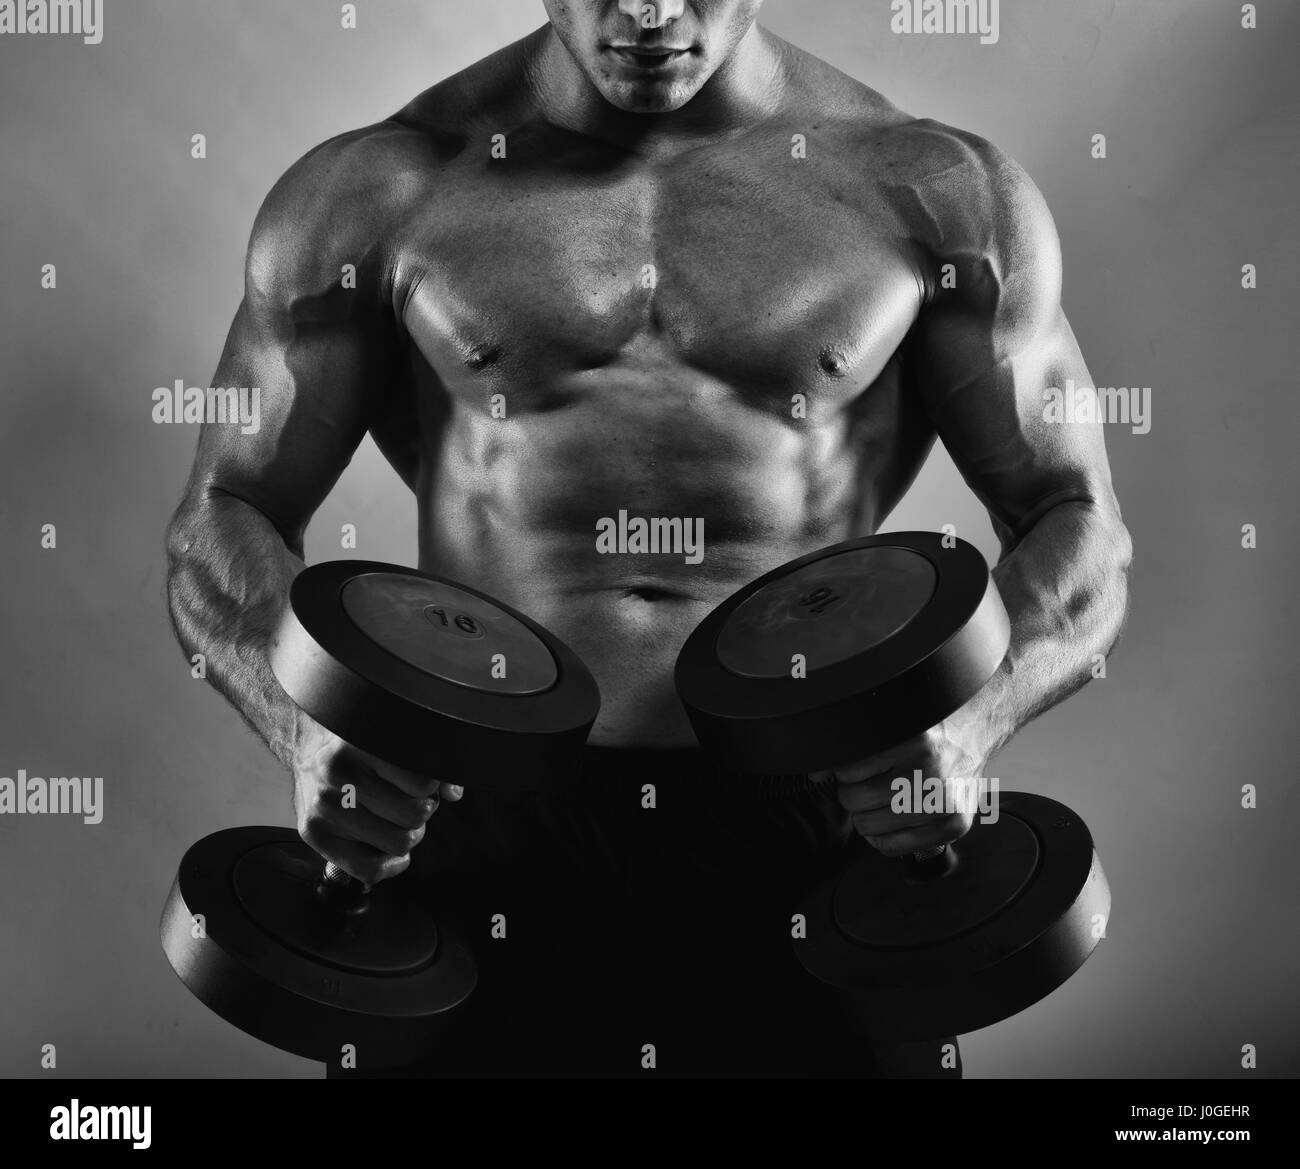 Athletic man training biceps Banque D'Images